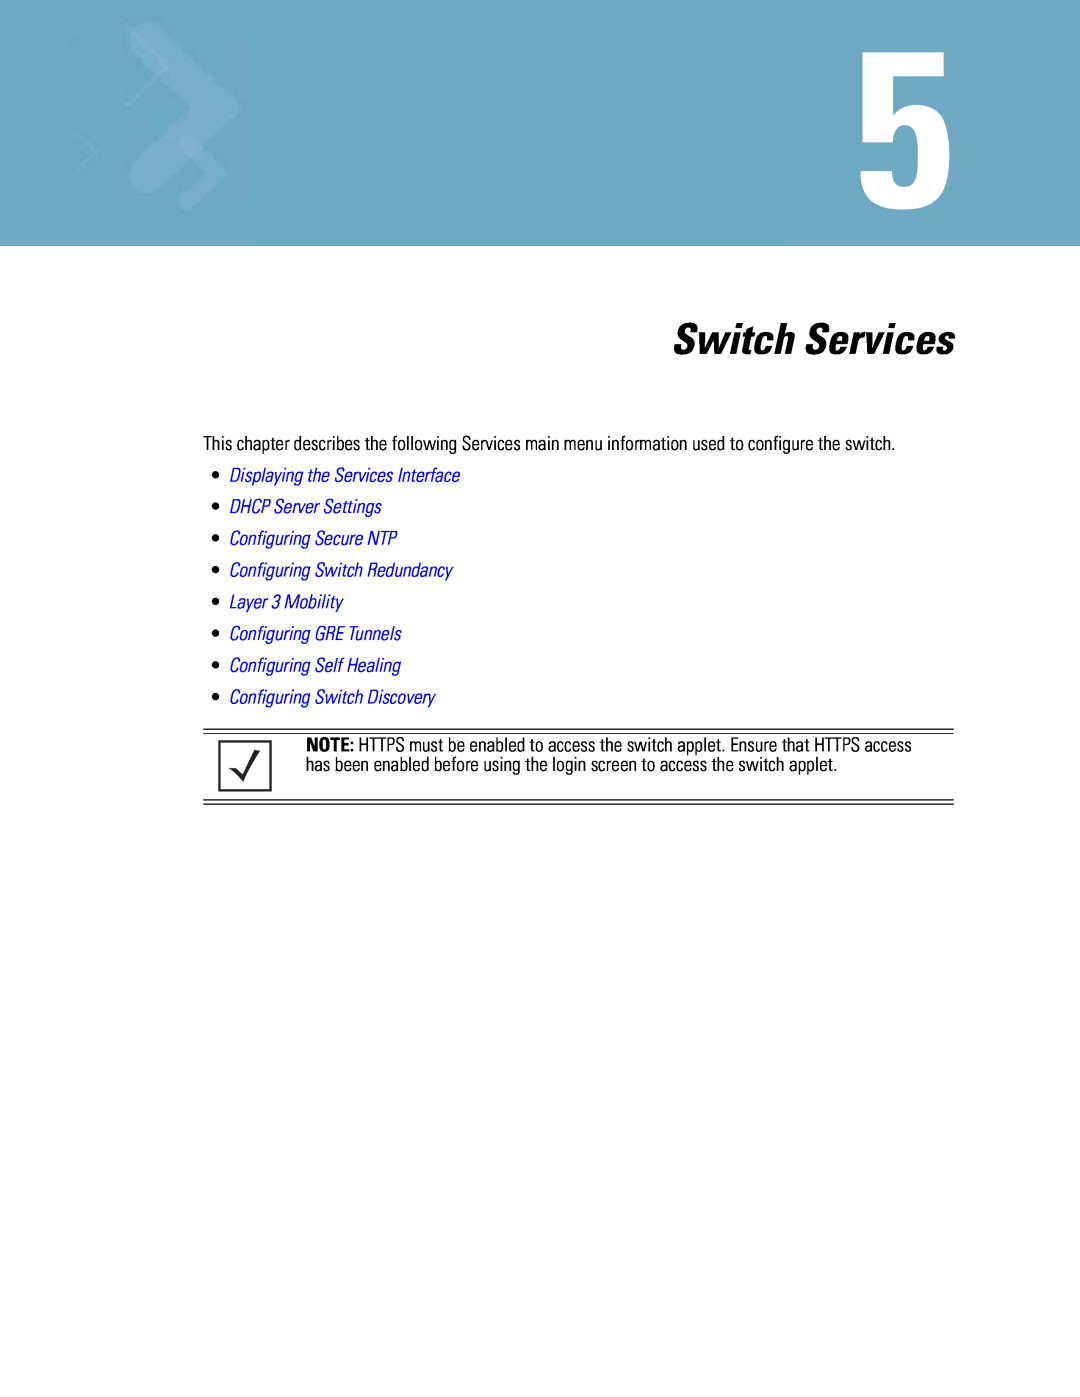 Motorola WS5100 manual Switch Services, •Displaying the Services Interface, •DHCP Server Settings •Configuring Secure NTP 